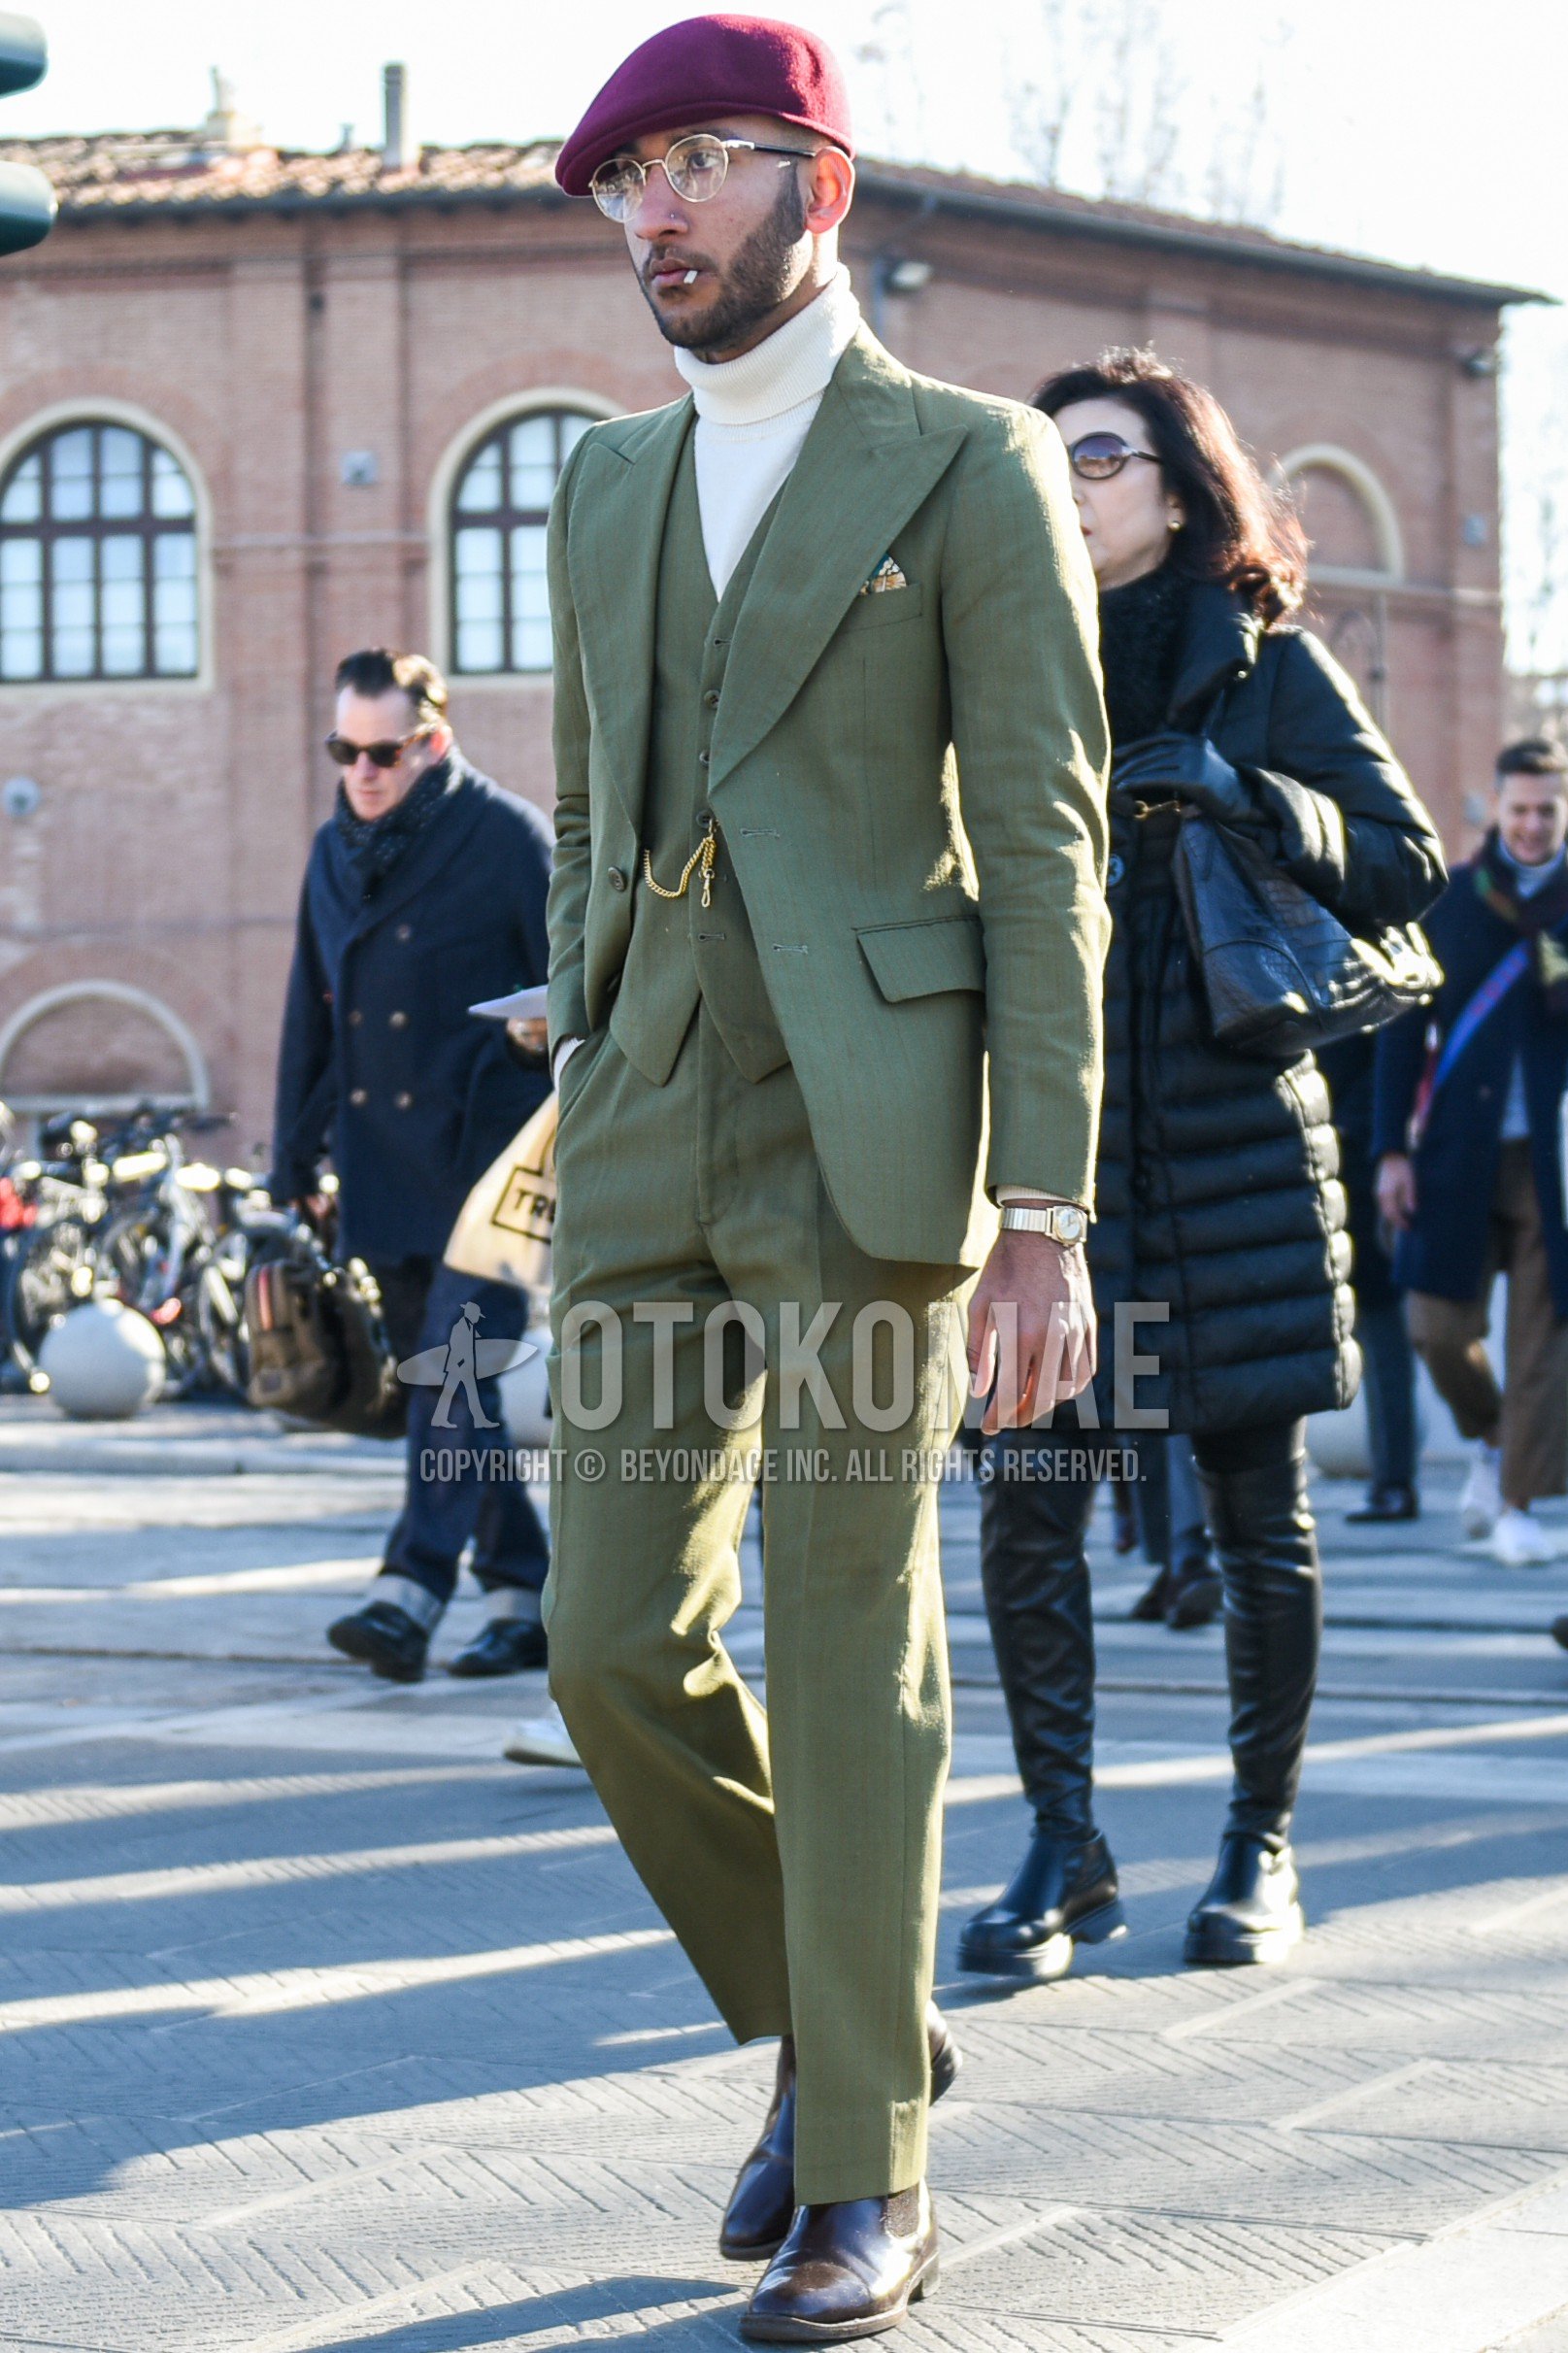 Men's autumn winter outfit with red plain hunting cap, silver plain glasses, white plain turtleneck knit, brown side-gore boots, olive green plain three-piece suit.